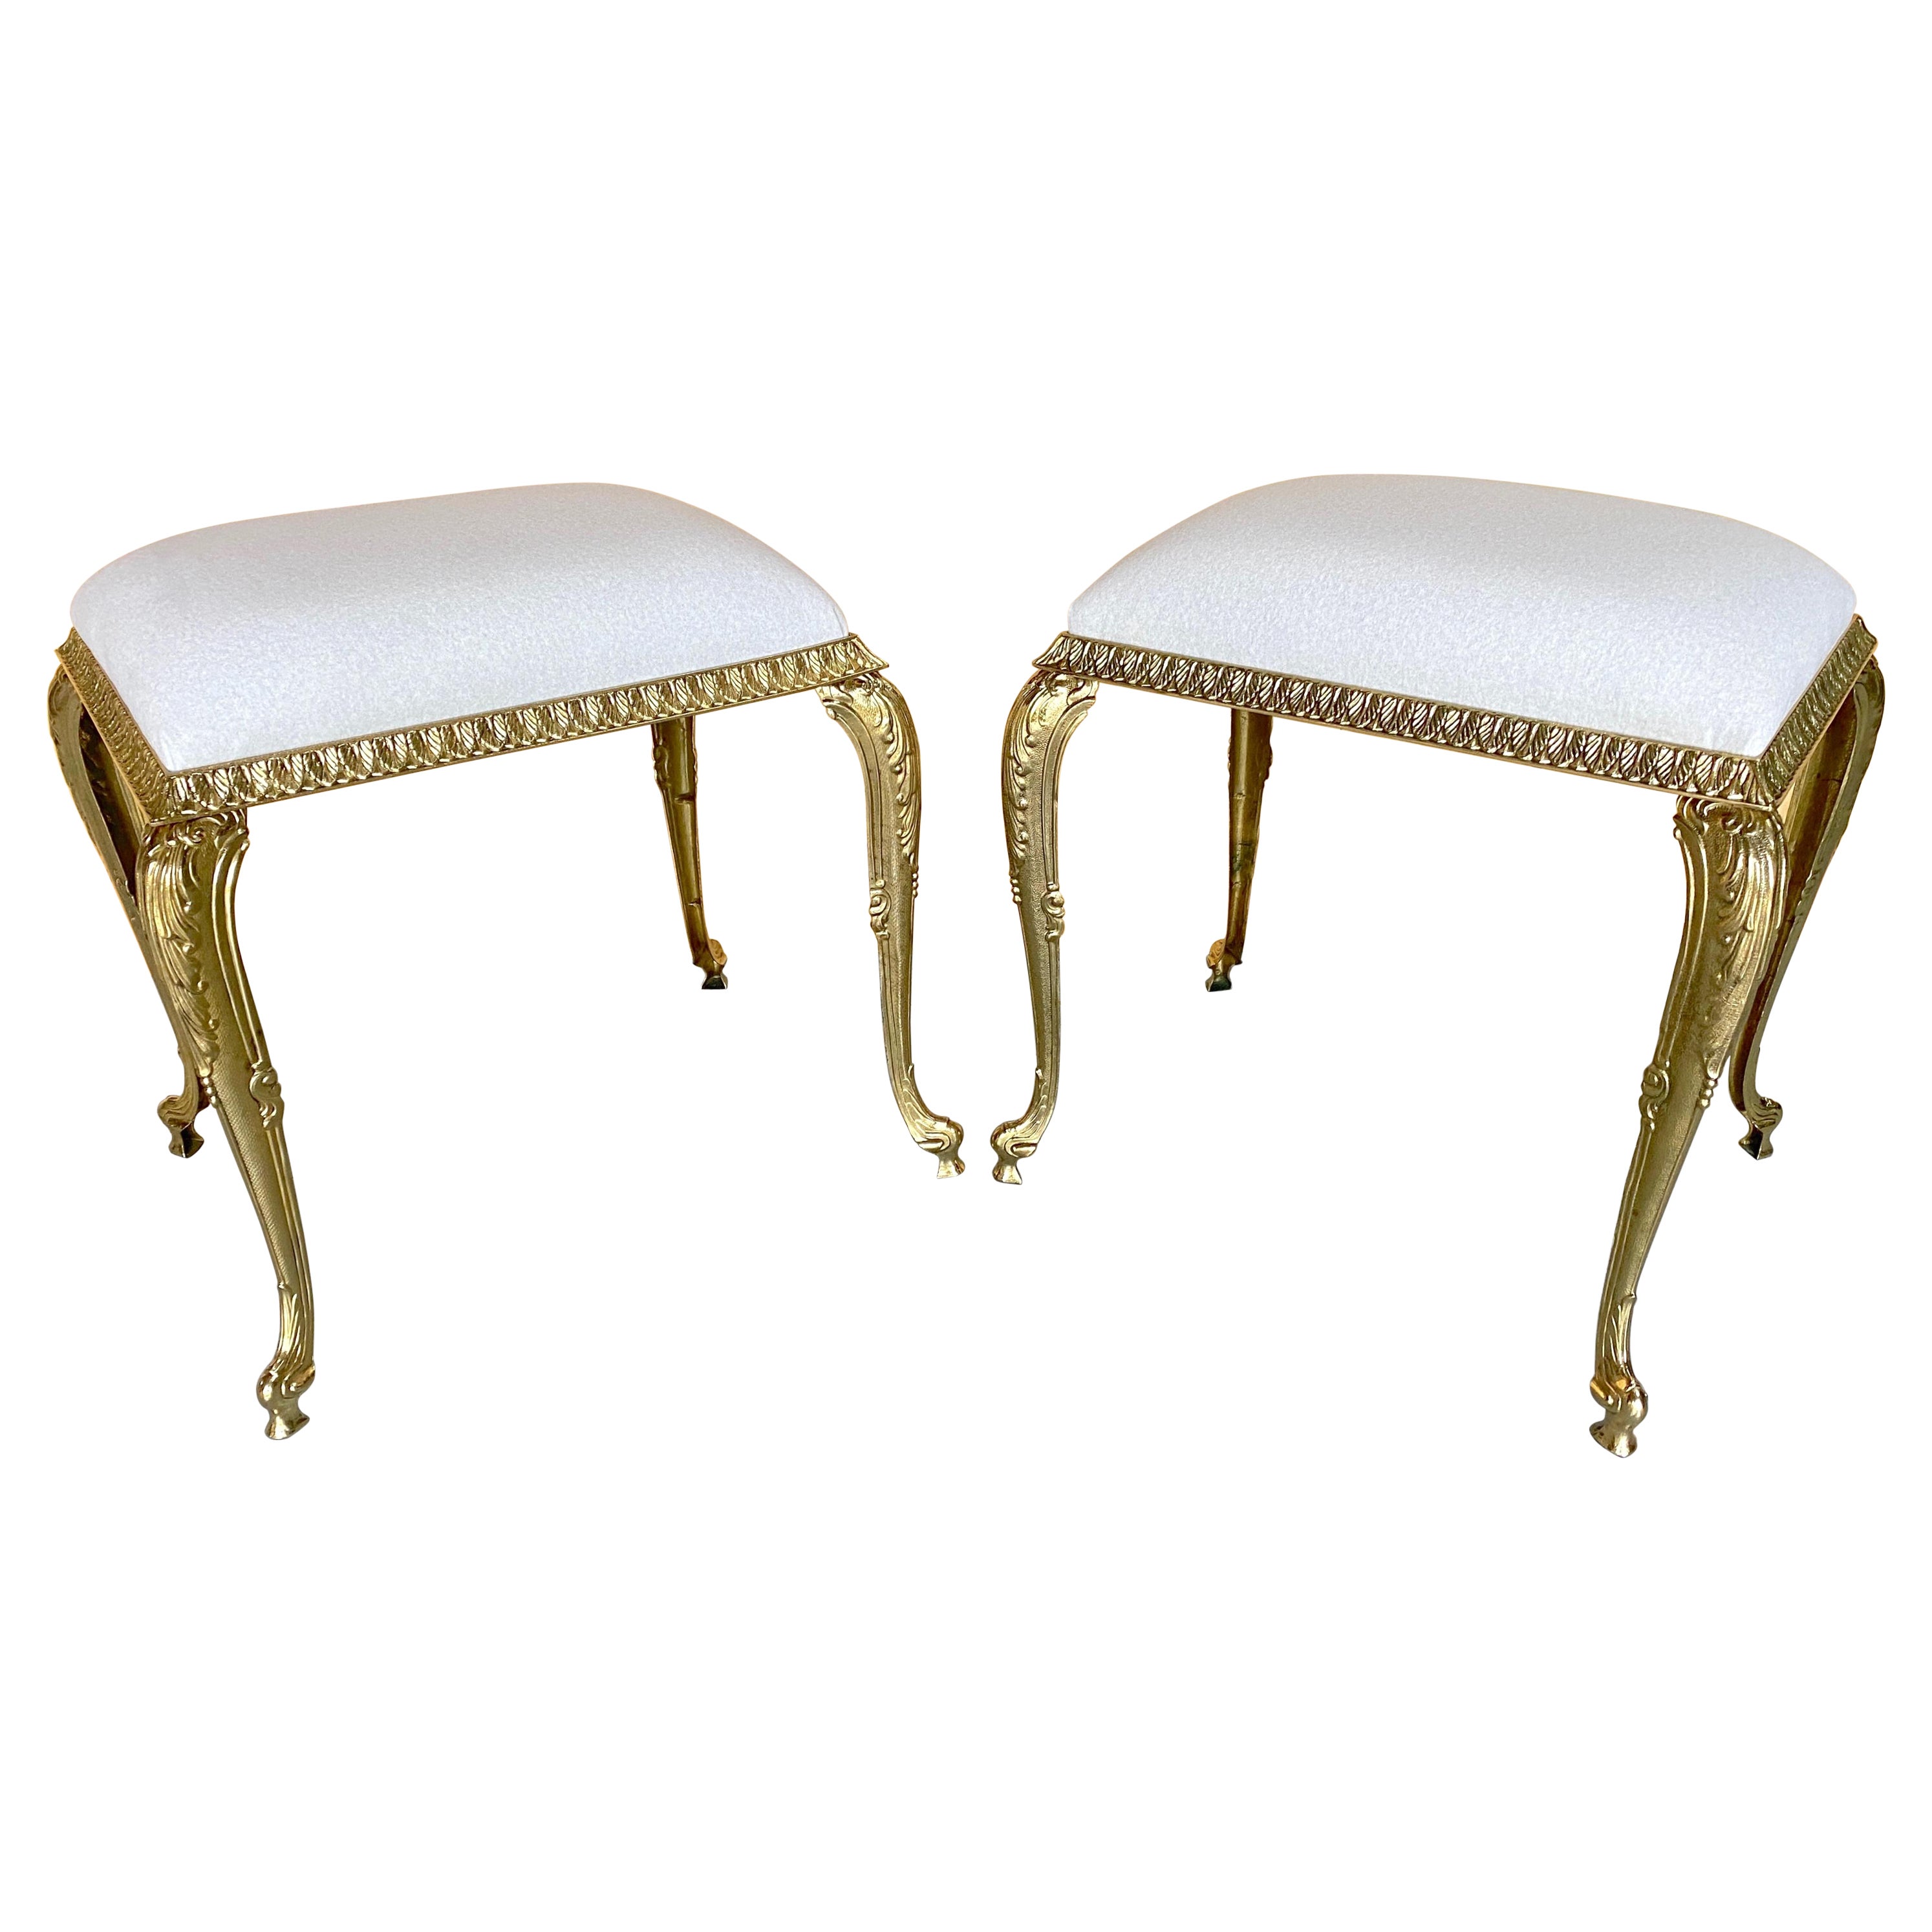 Pair of French Neoclassical Bronze Benches /Ottomans Kravet Cashmere Upholstery  For Sale